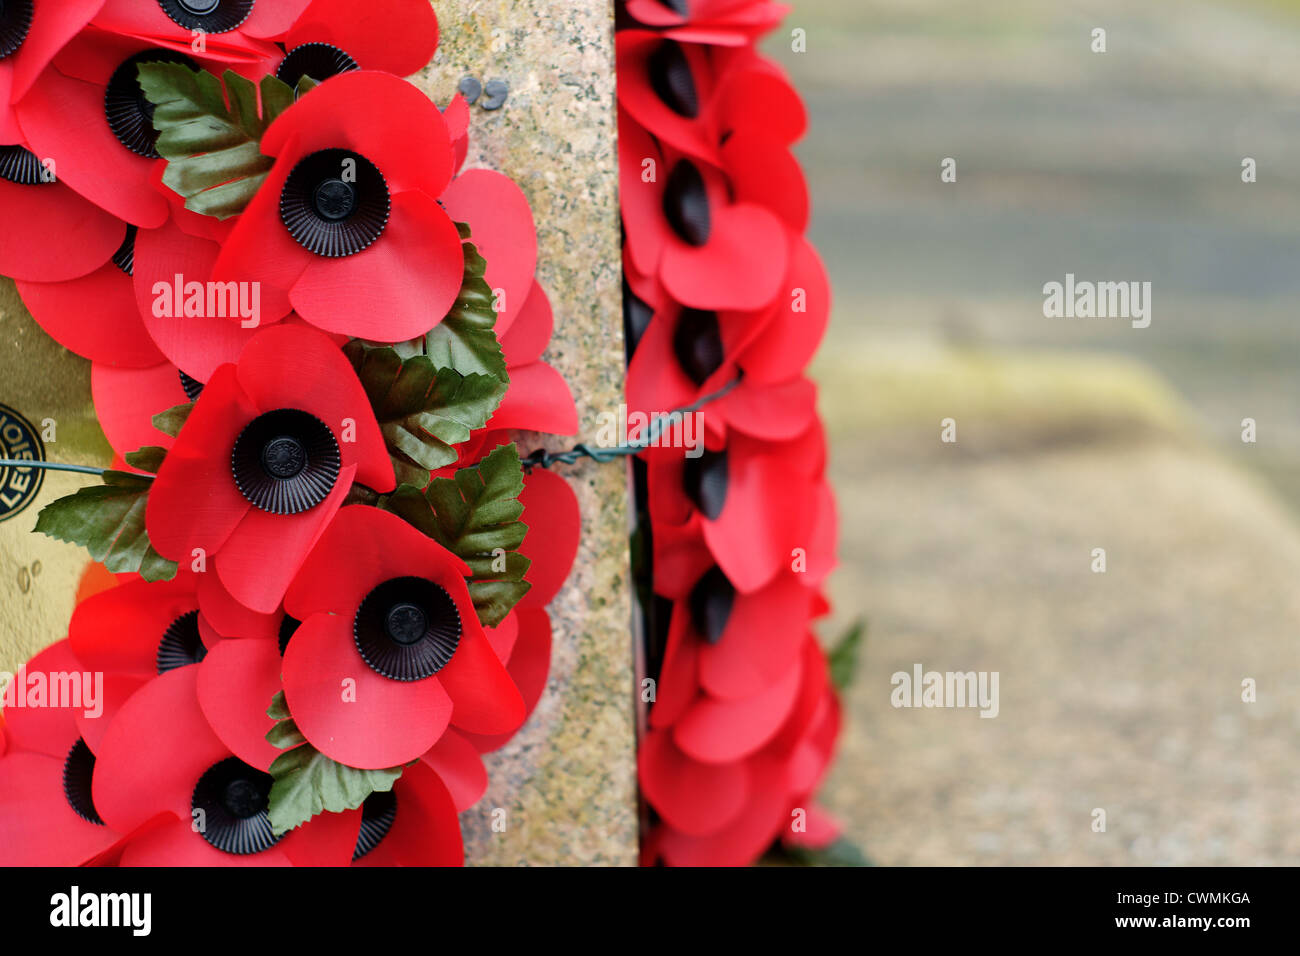 Remembrance day poppy wreathes on a war memorial to commemorate fallen servicemen in past conflicts Stock Photo